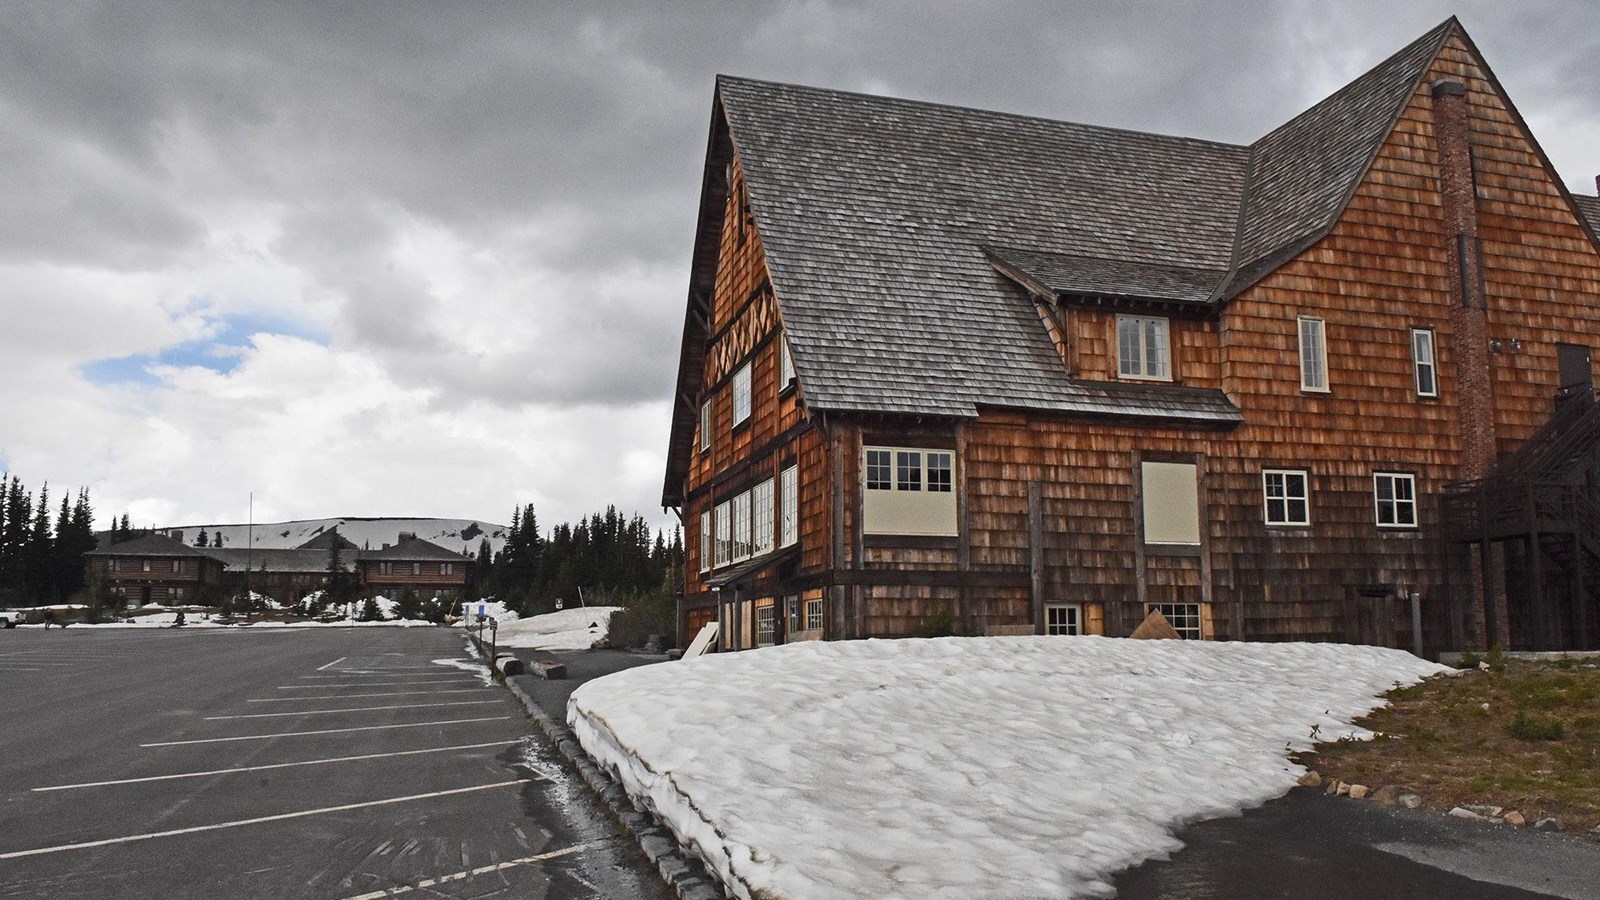 A three story rustic wooden building with patches of snow outside.